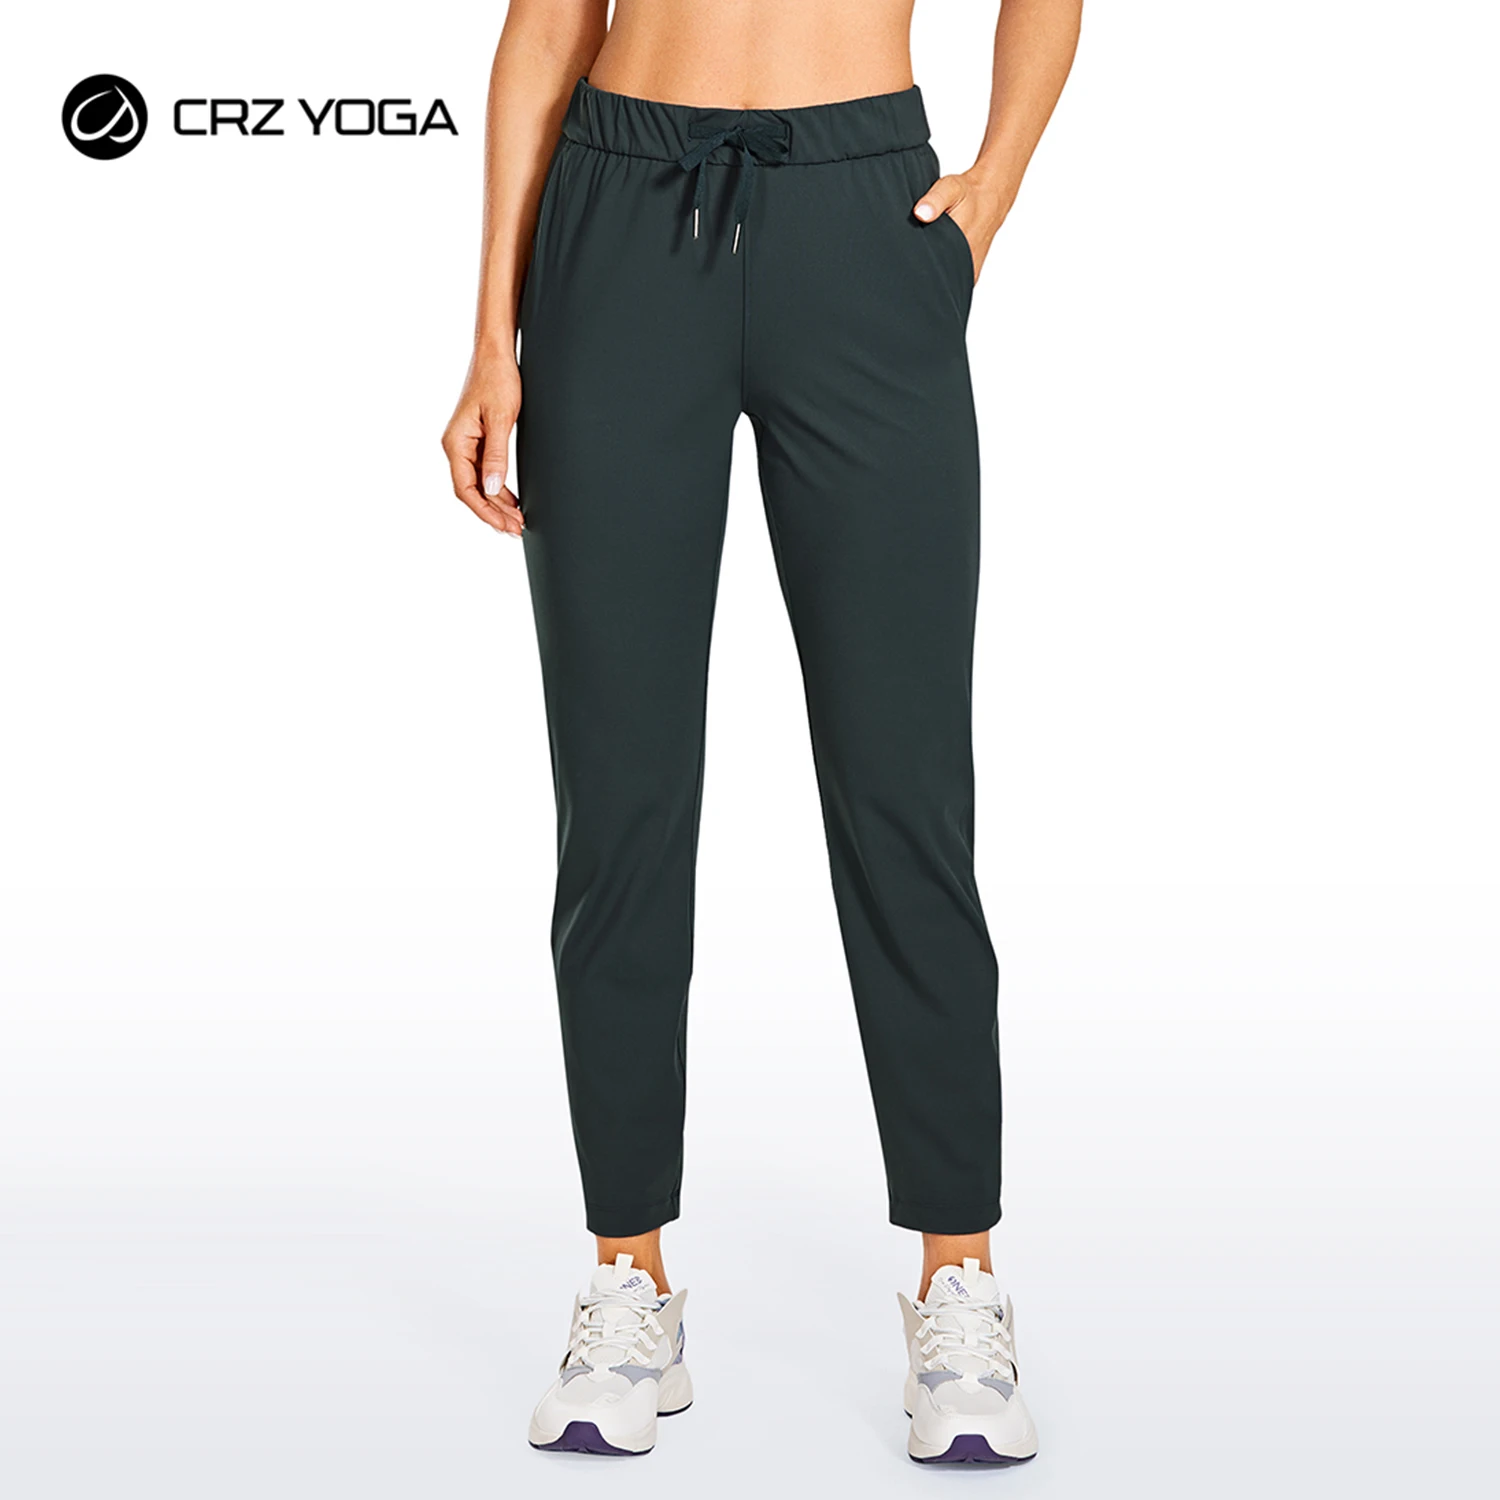 CRZ YOGA Women's Stretch Lounge Sweatpants Travel Trousers Ankle Drawstring 7/8 Athletic Training Track Pants